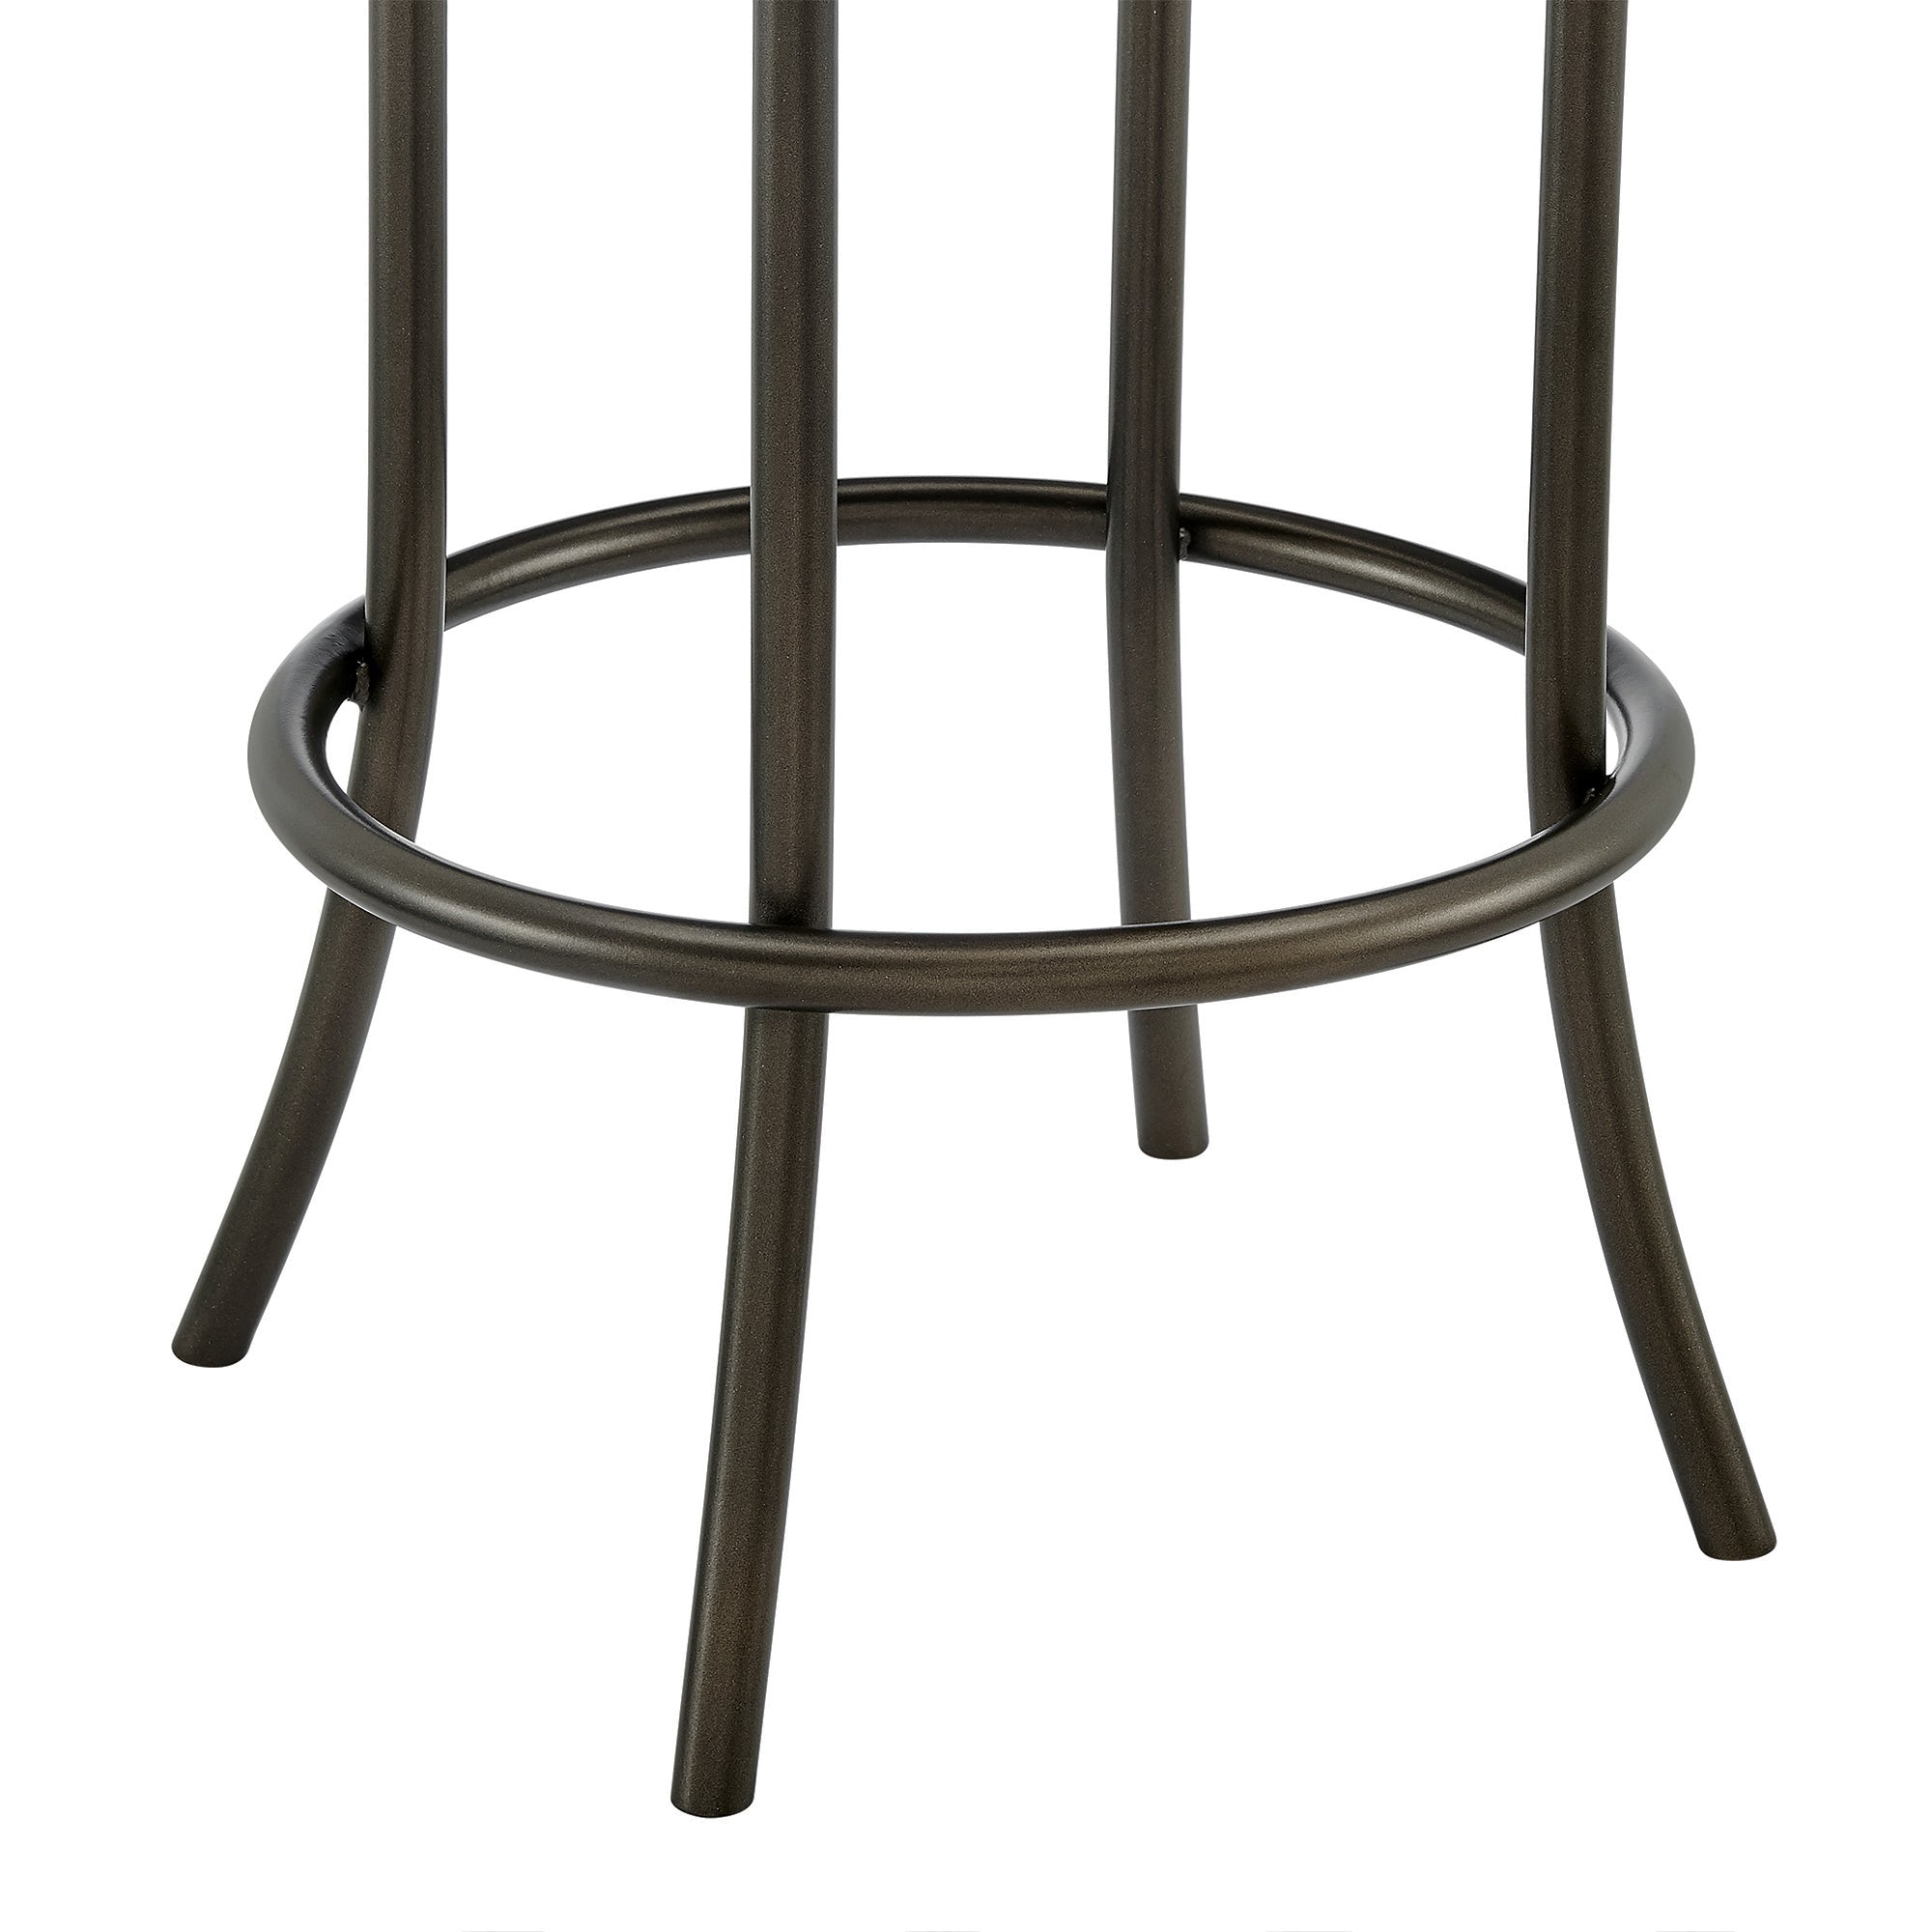 Armen Living - Natya Swivel Counter or Bar Stool in Metal with Faux Leather - 840254333659